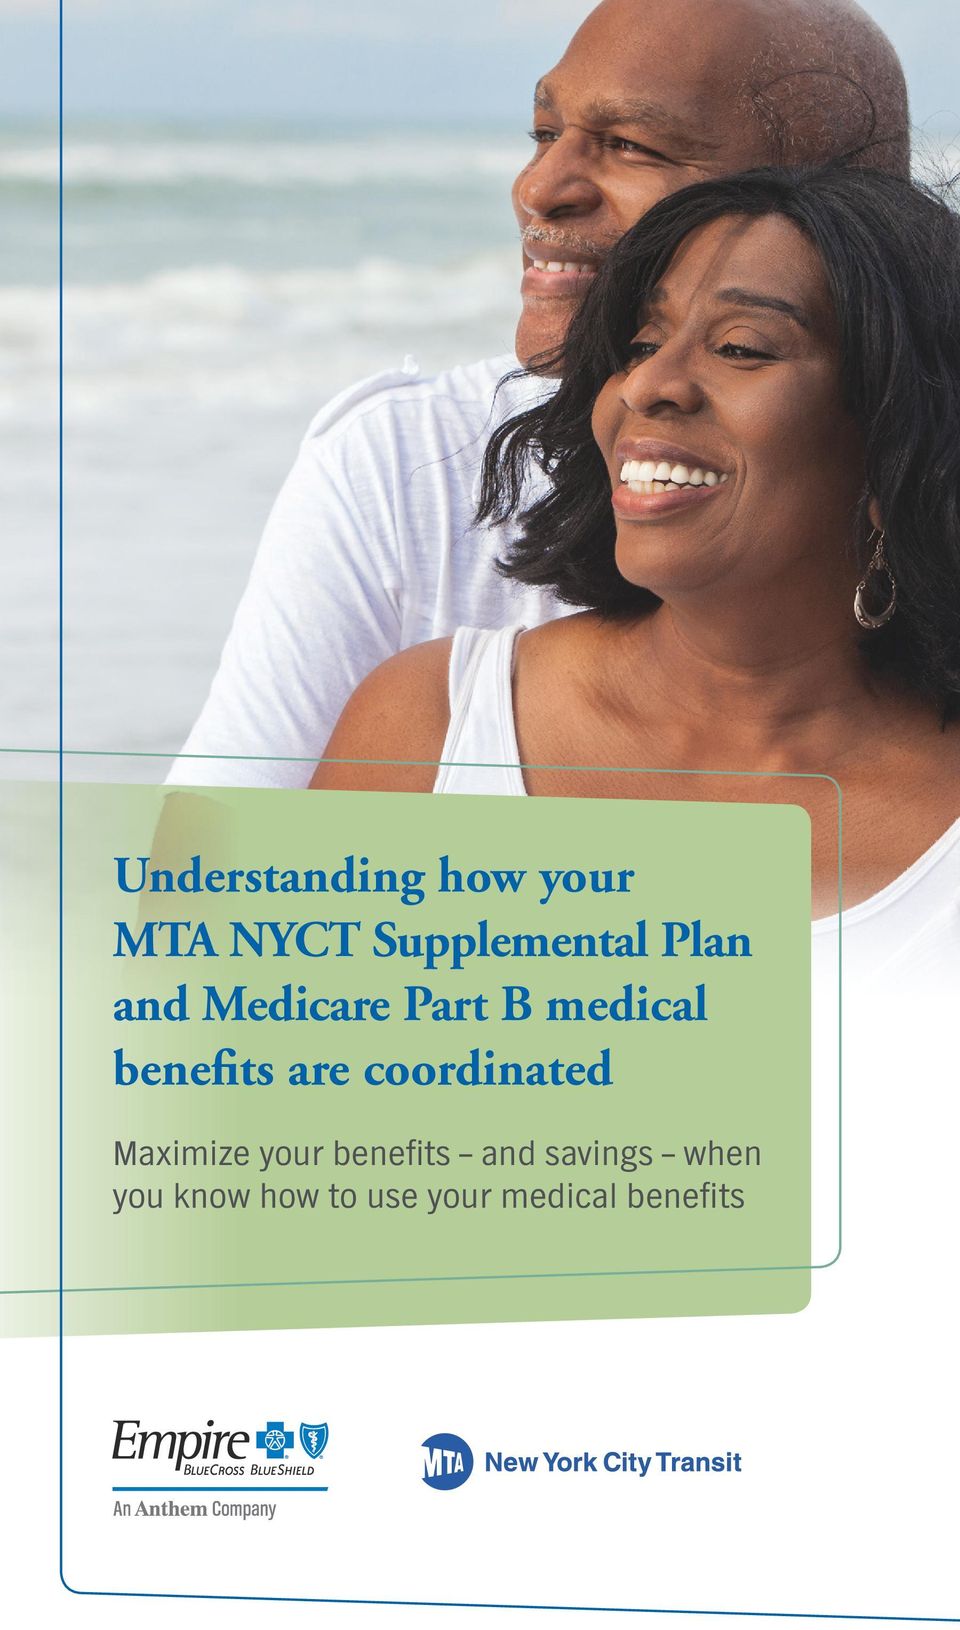 coordinated Maximize your benefits and